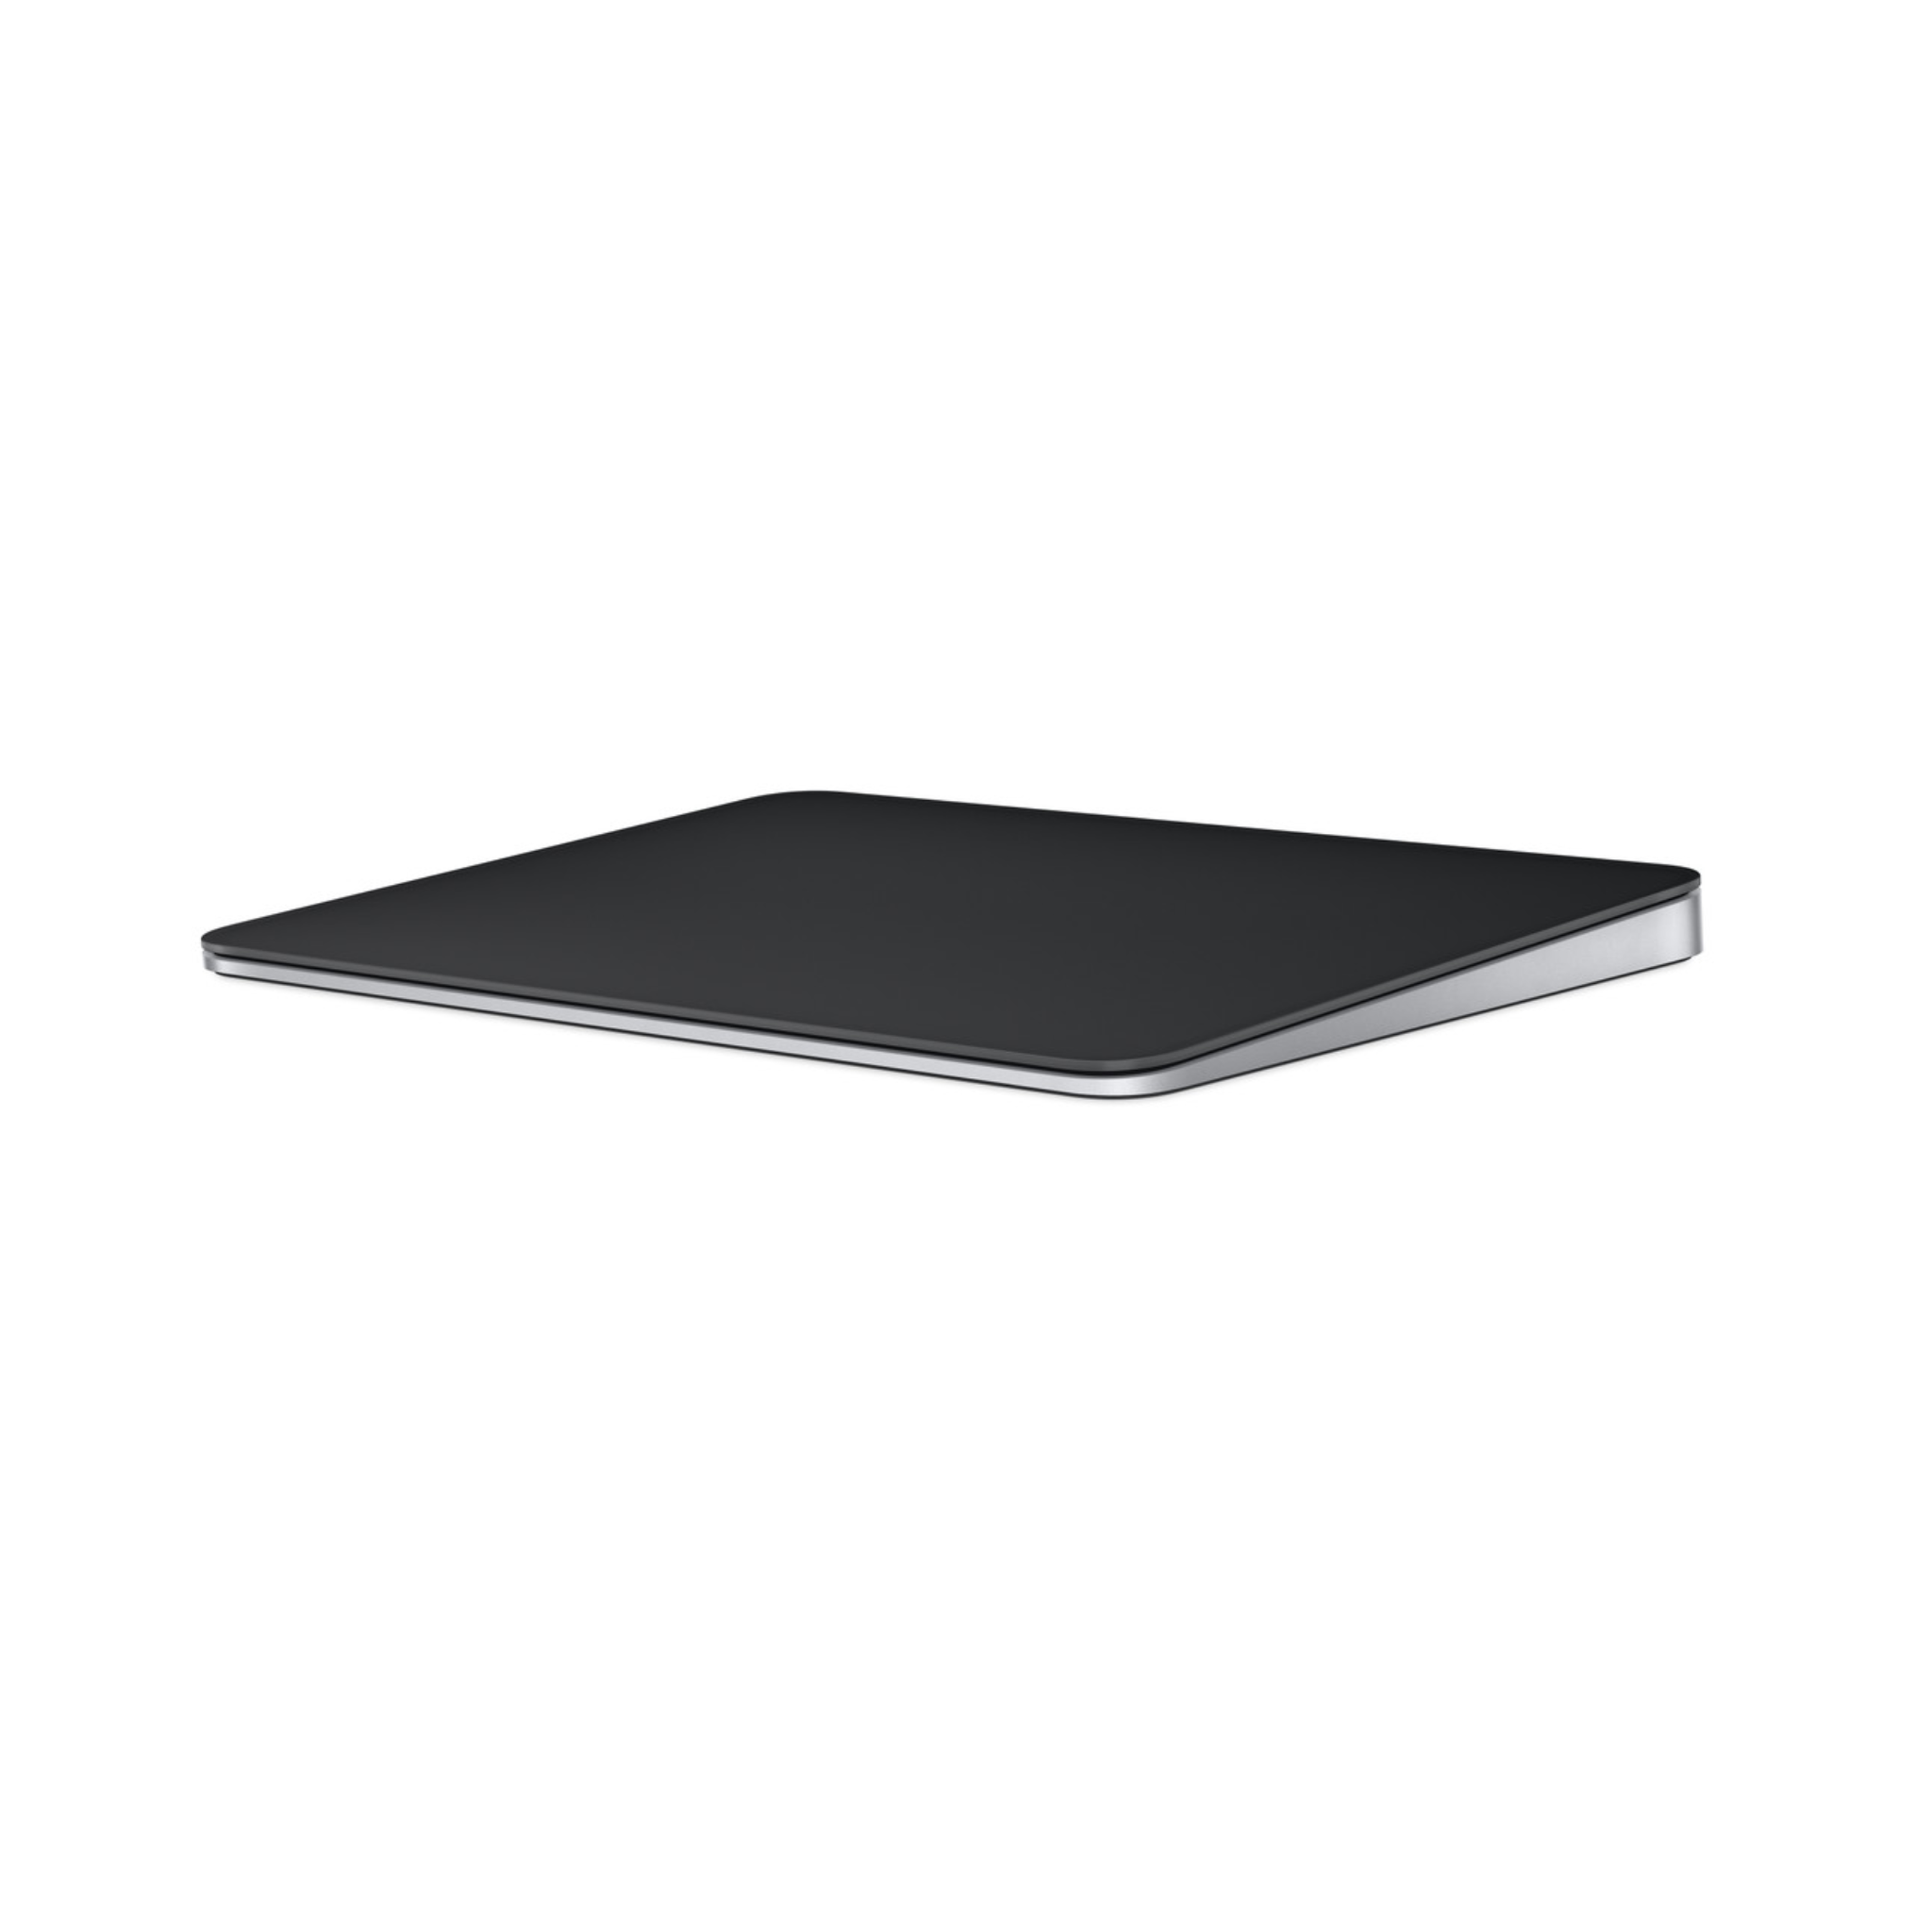 Magic Trackpad - Multi-Touch Surface